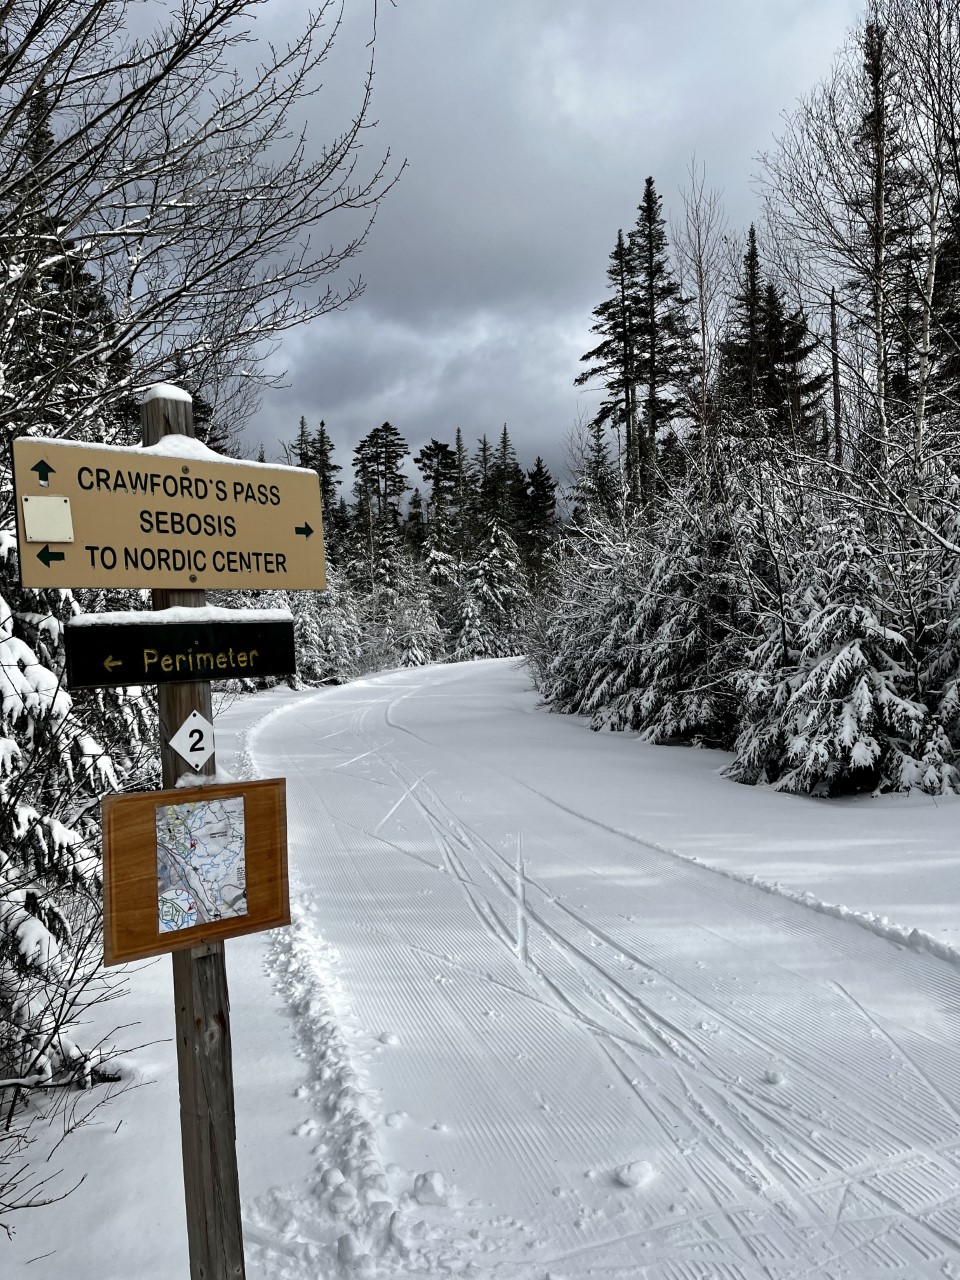 Thanks to a foot of new snow the Nordic Trails are looking prime!